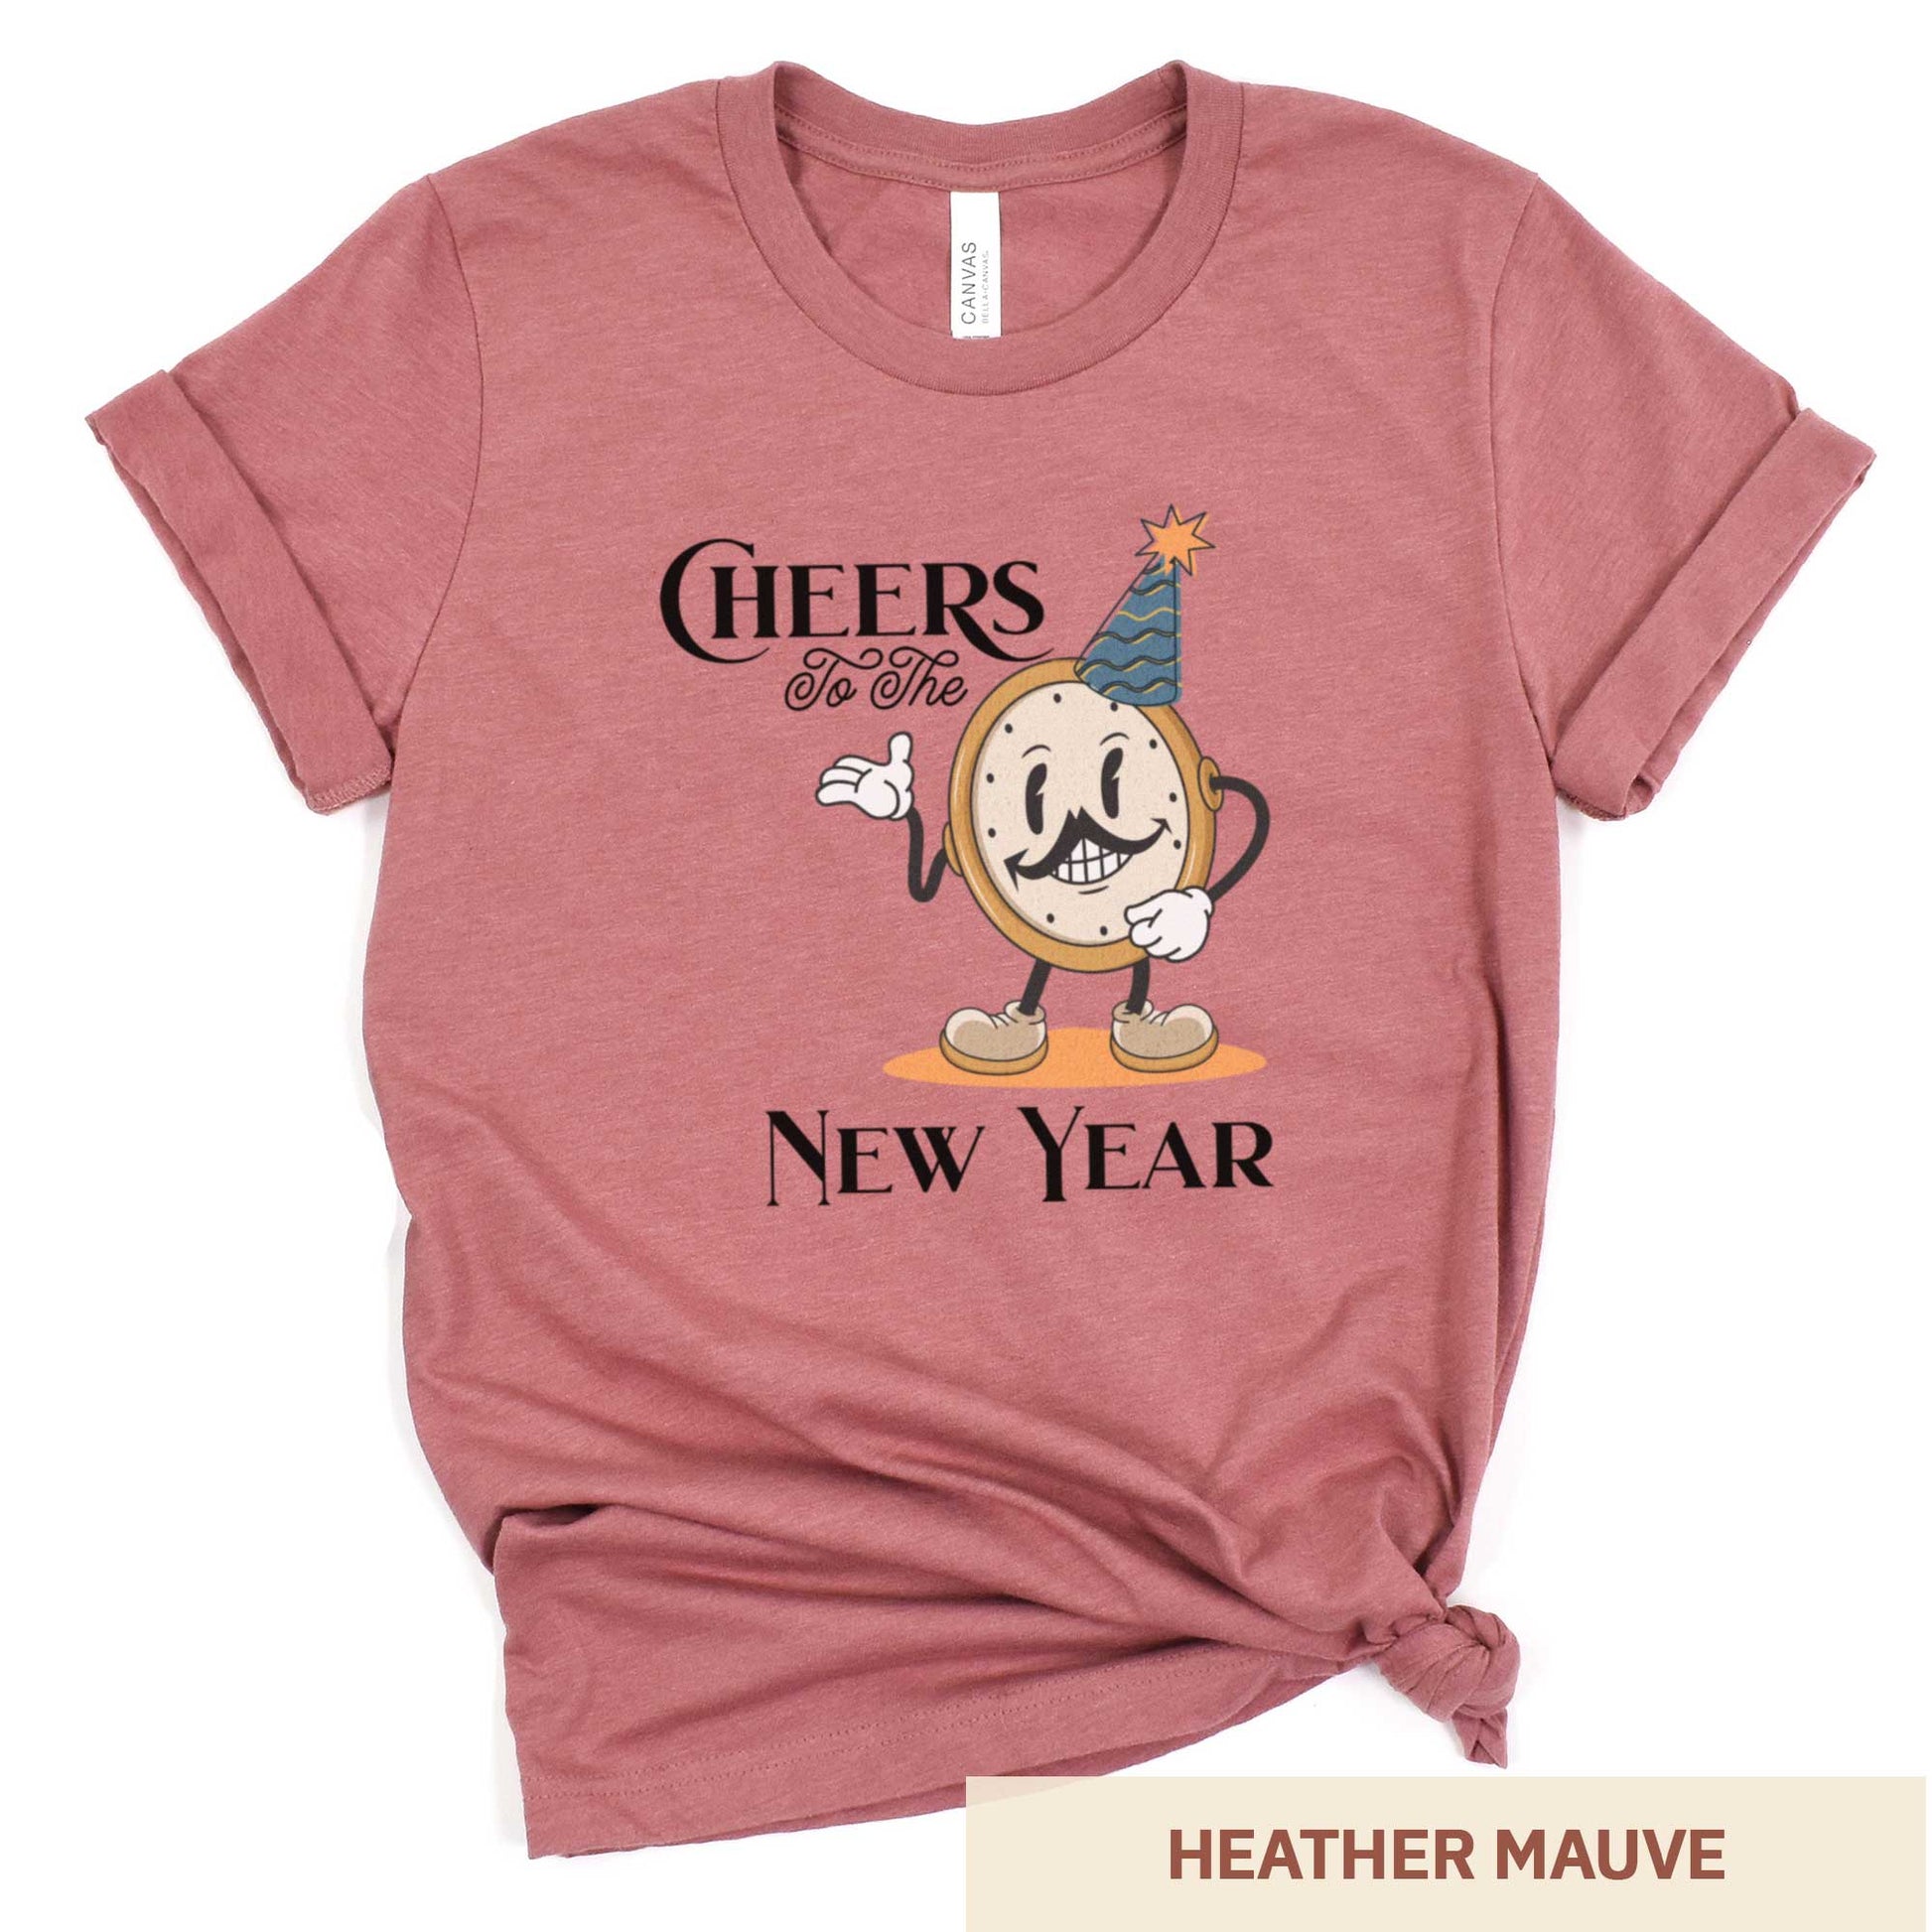 A heather mauve Bella Canvas t-shirt featuring a retro looking clock cartoon with a party hat next to the words Cheers to the New Year.